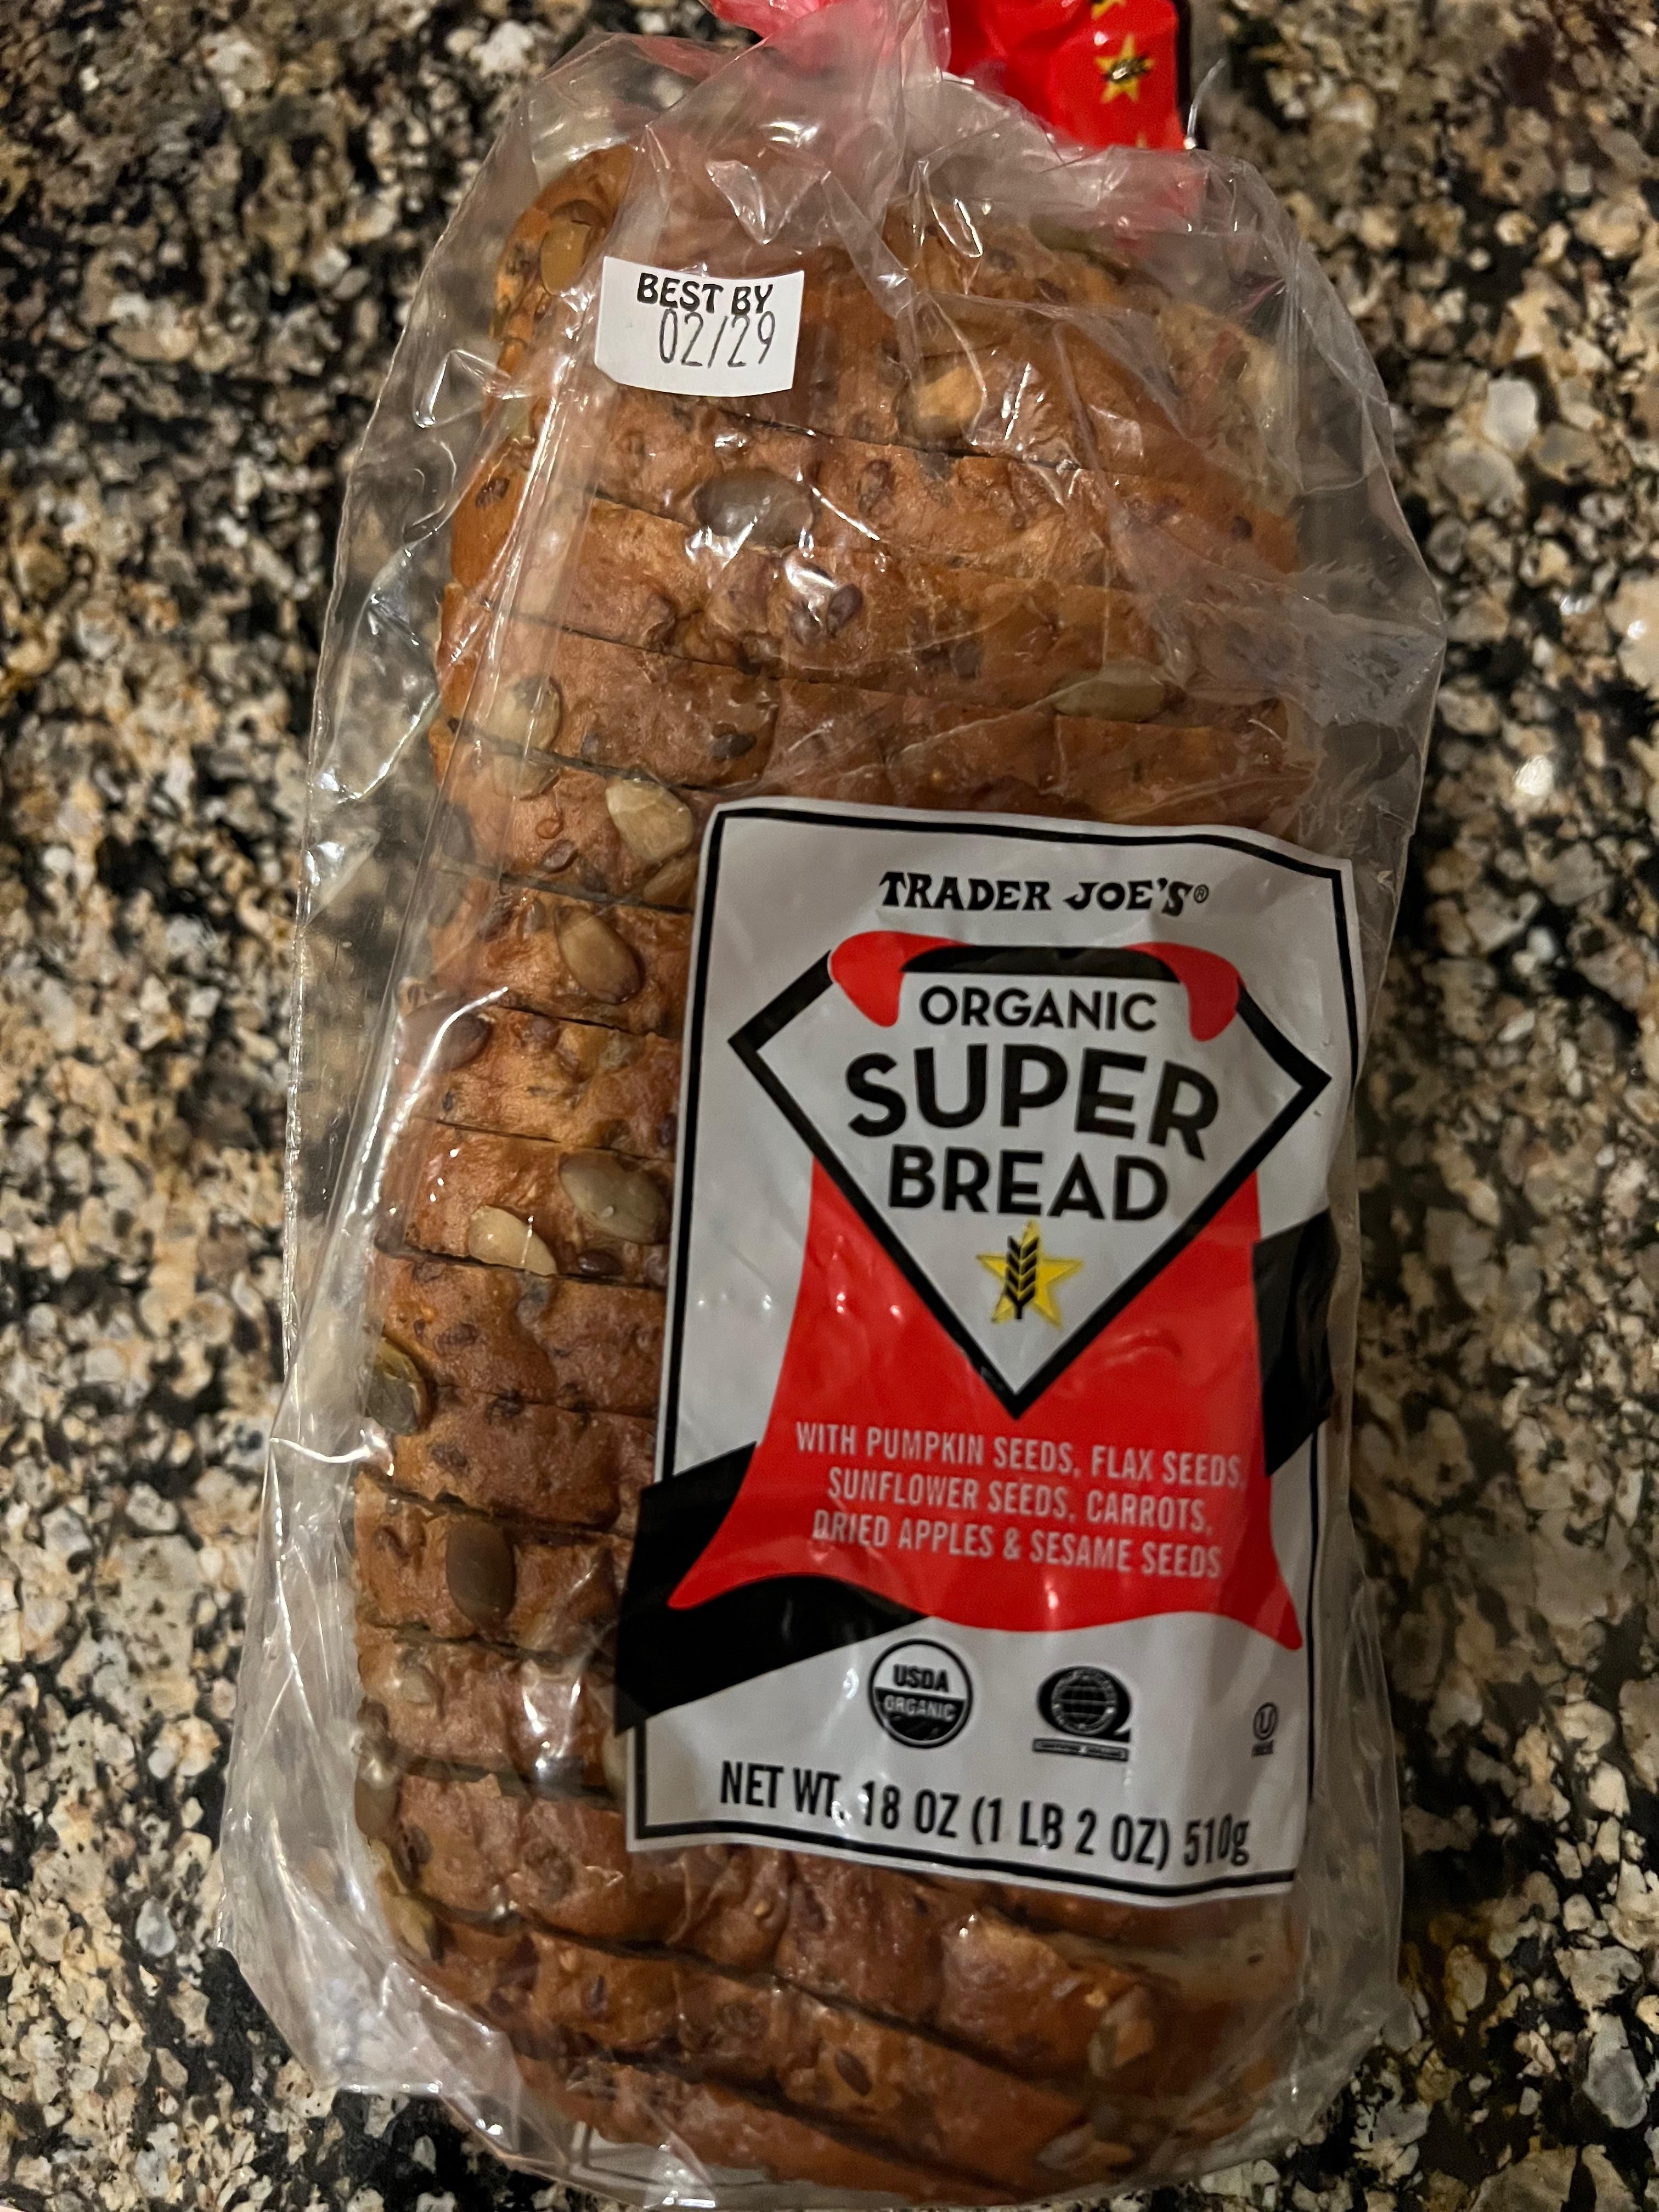 Trader Joe’s Super Bread is so super, it expires only next year